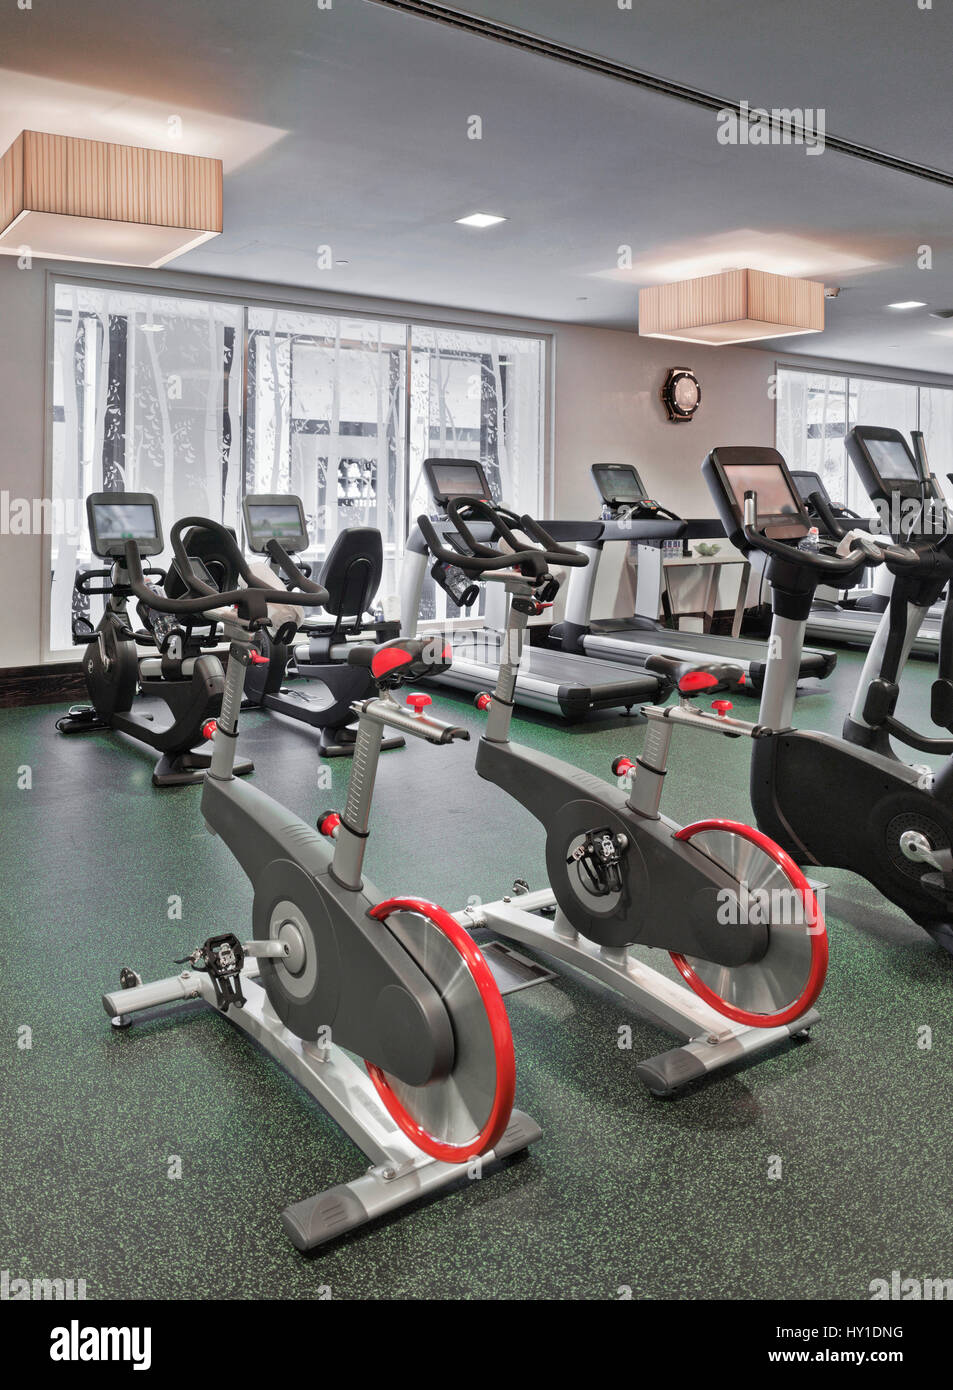 Fitness club. Health centre. fitness equipment. sports equipment. Gym. Healthy lifestyle Stock Photo